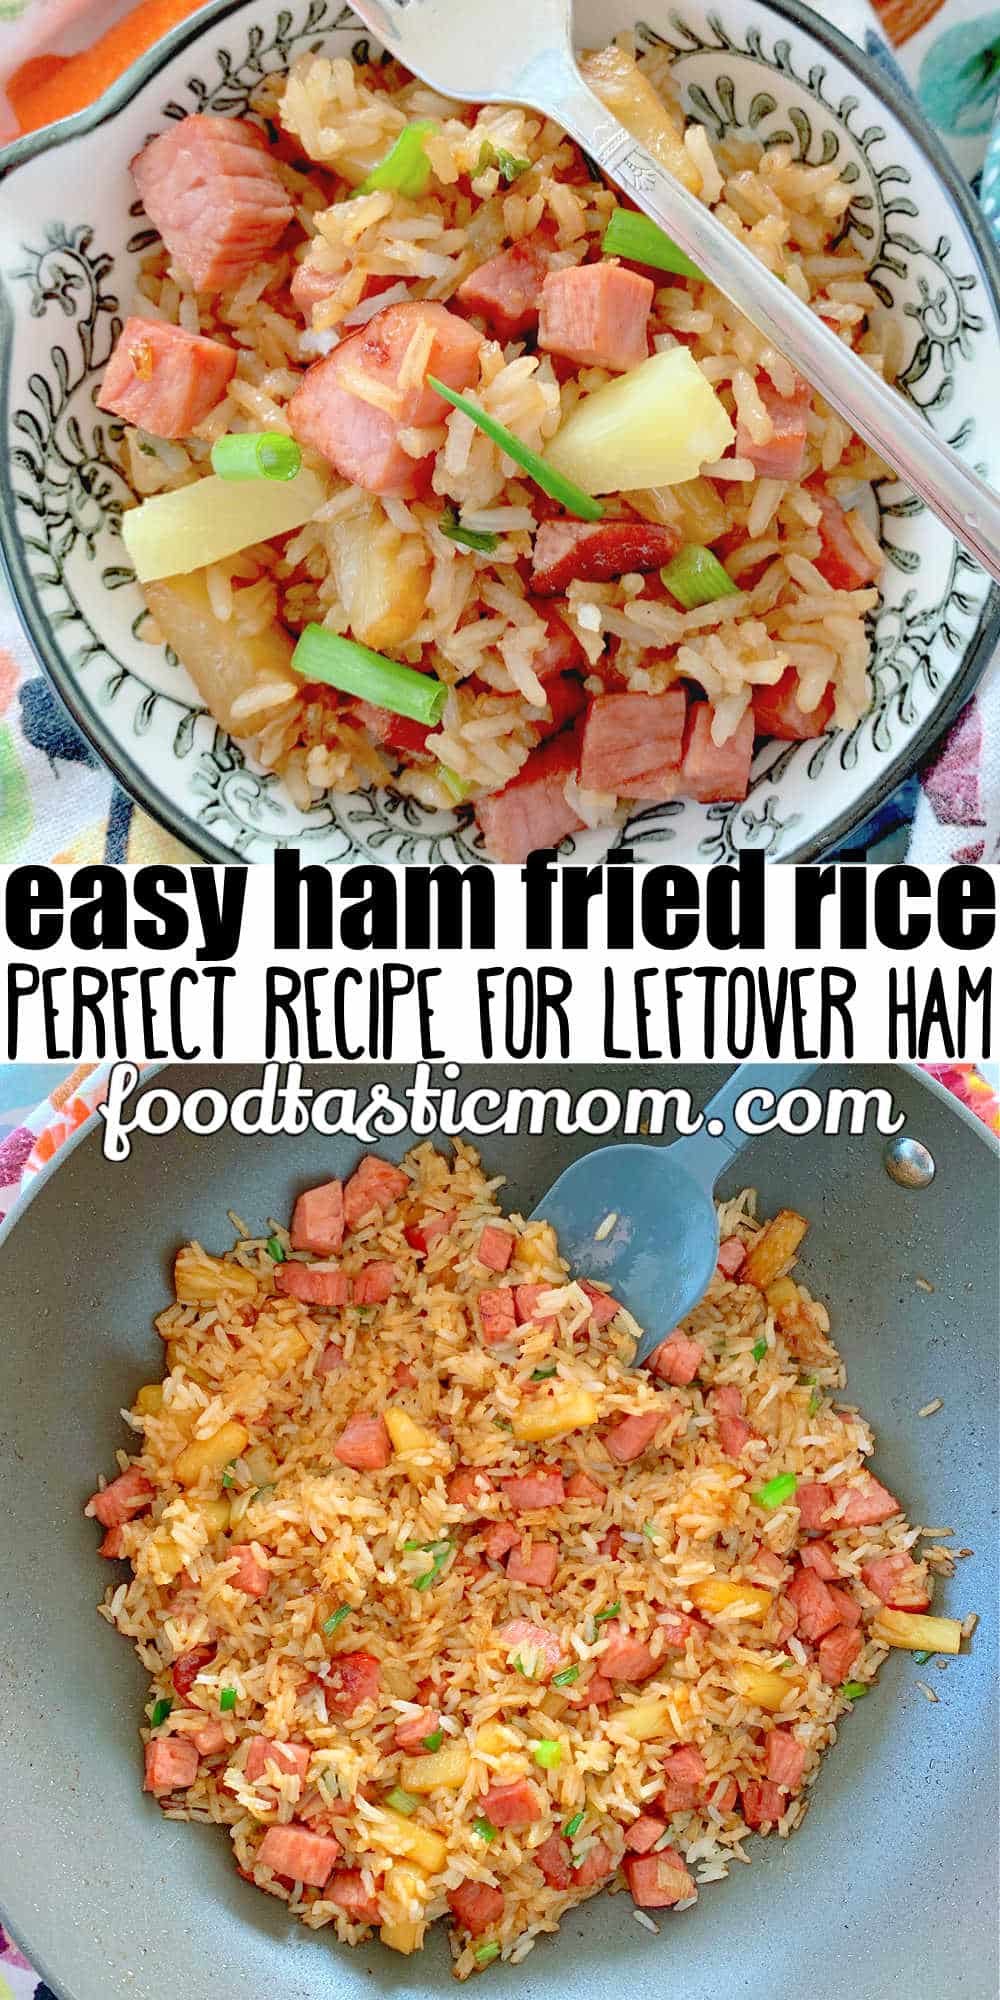 Easy and delicious fried rice recipe that is perfect for leftover ham! Save this recipe for your leftover Christmas and Easter hams. via @foodtasticmom